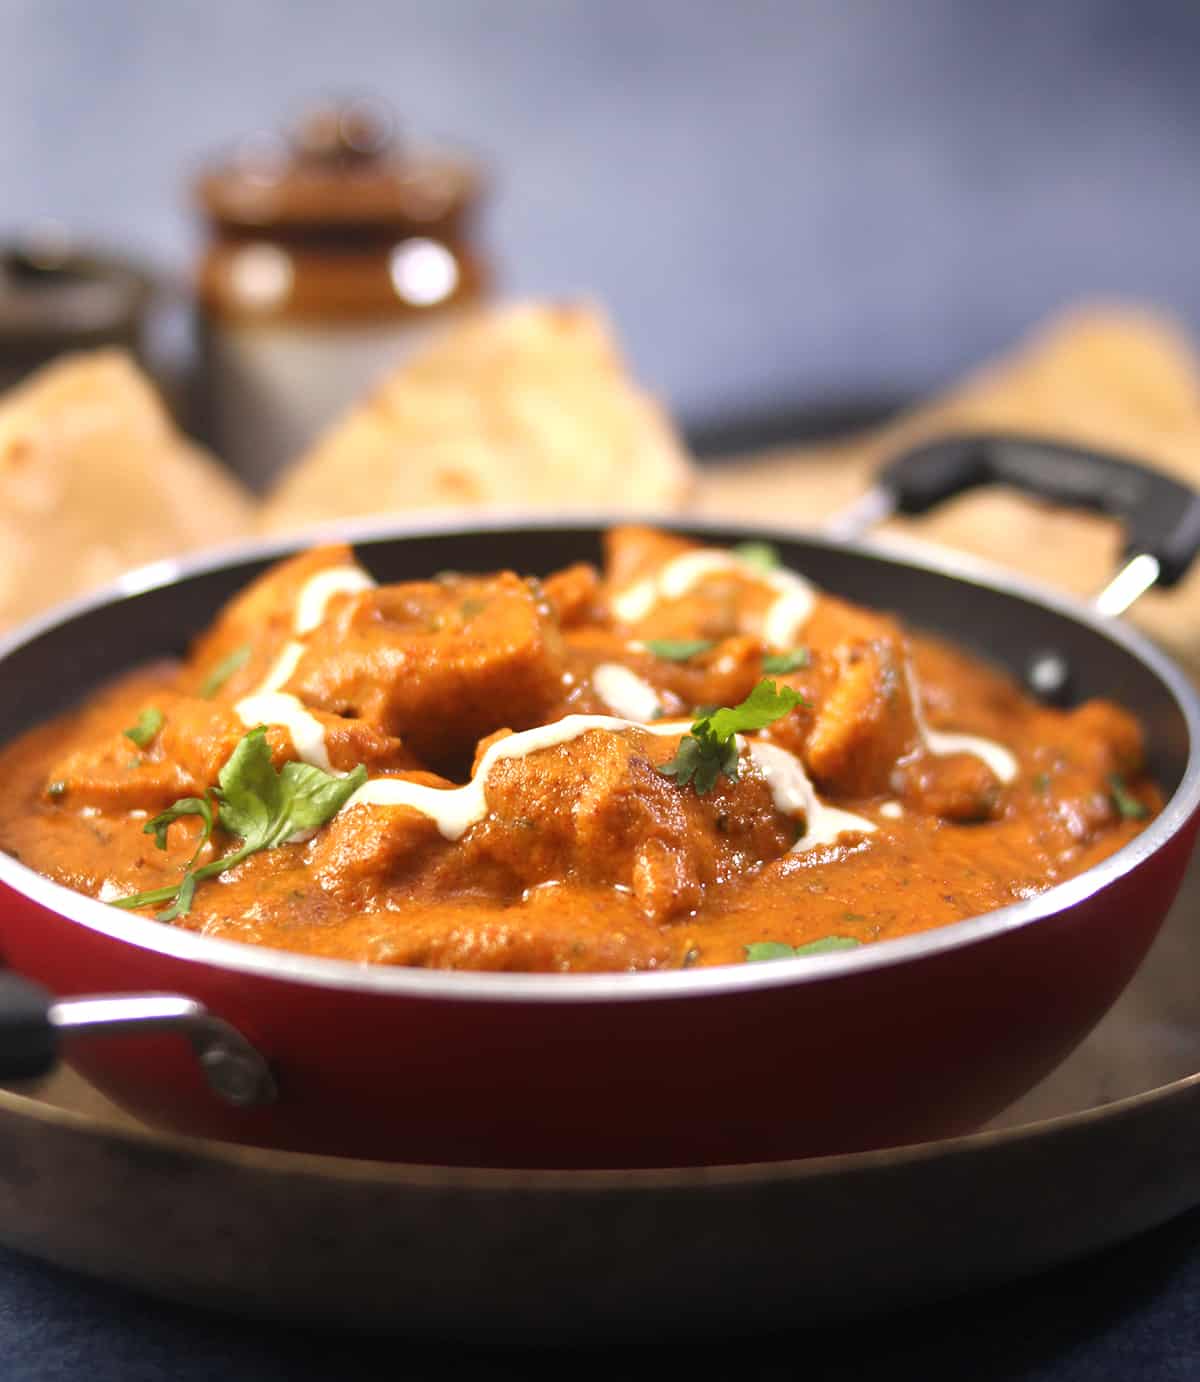 Classic and popular Indian butter chicken or murgh makhani curry served in kadai with chapati, roti.